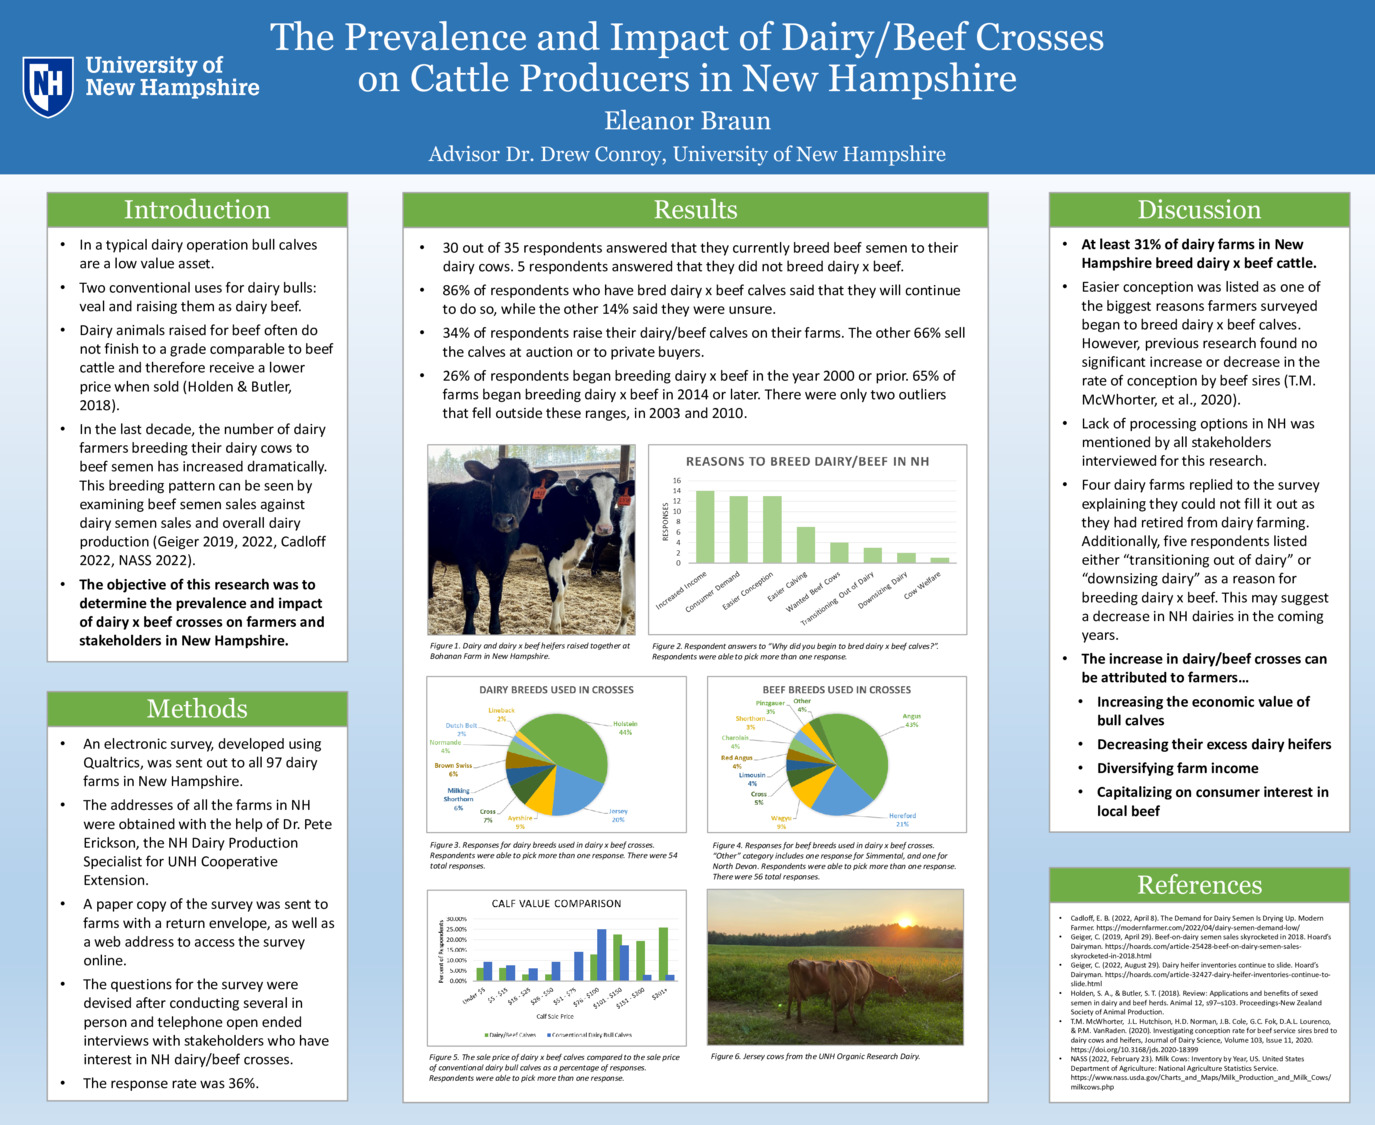 The Prevalence And Impact Of Dairy/Beef Crosses On Cattle Producers In New Hampshire by eb1225